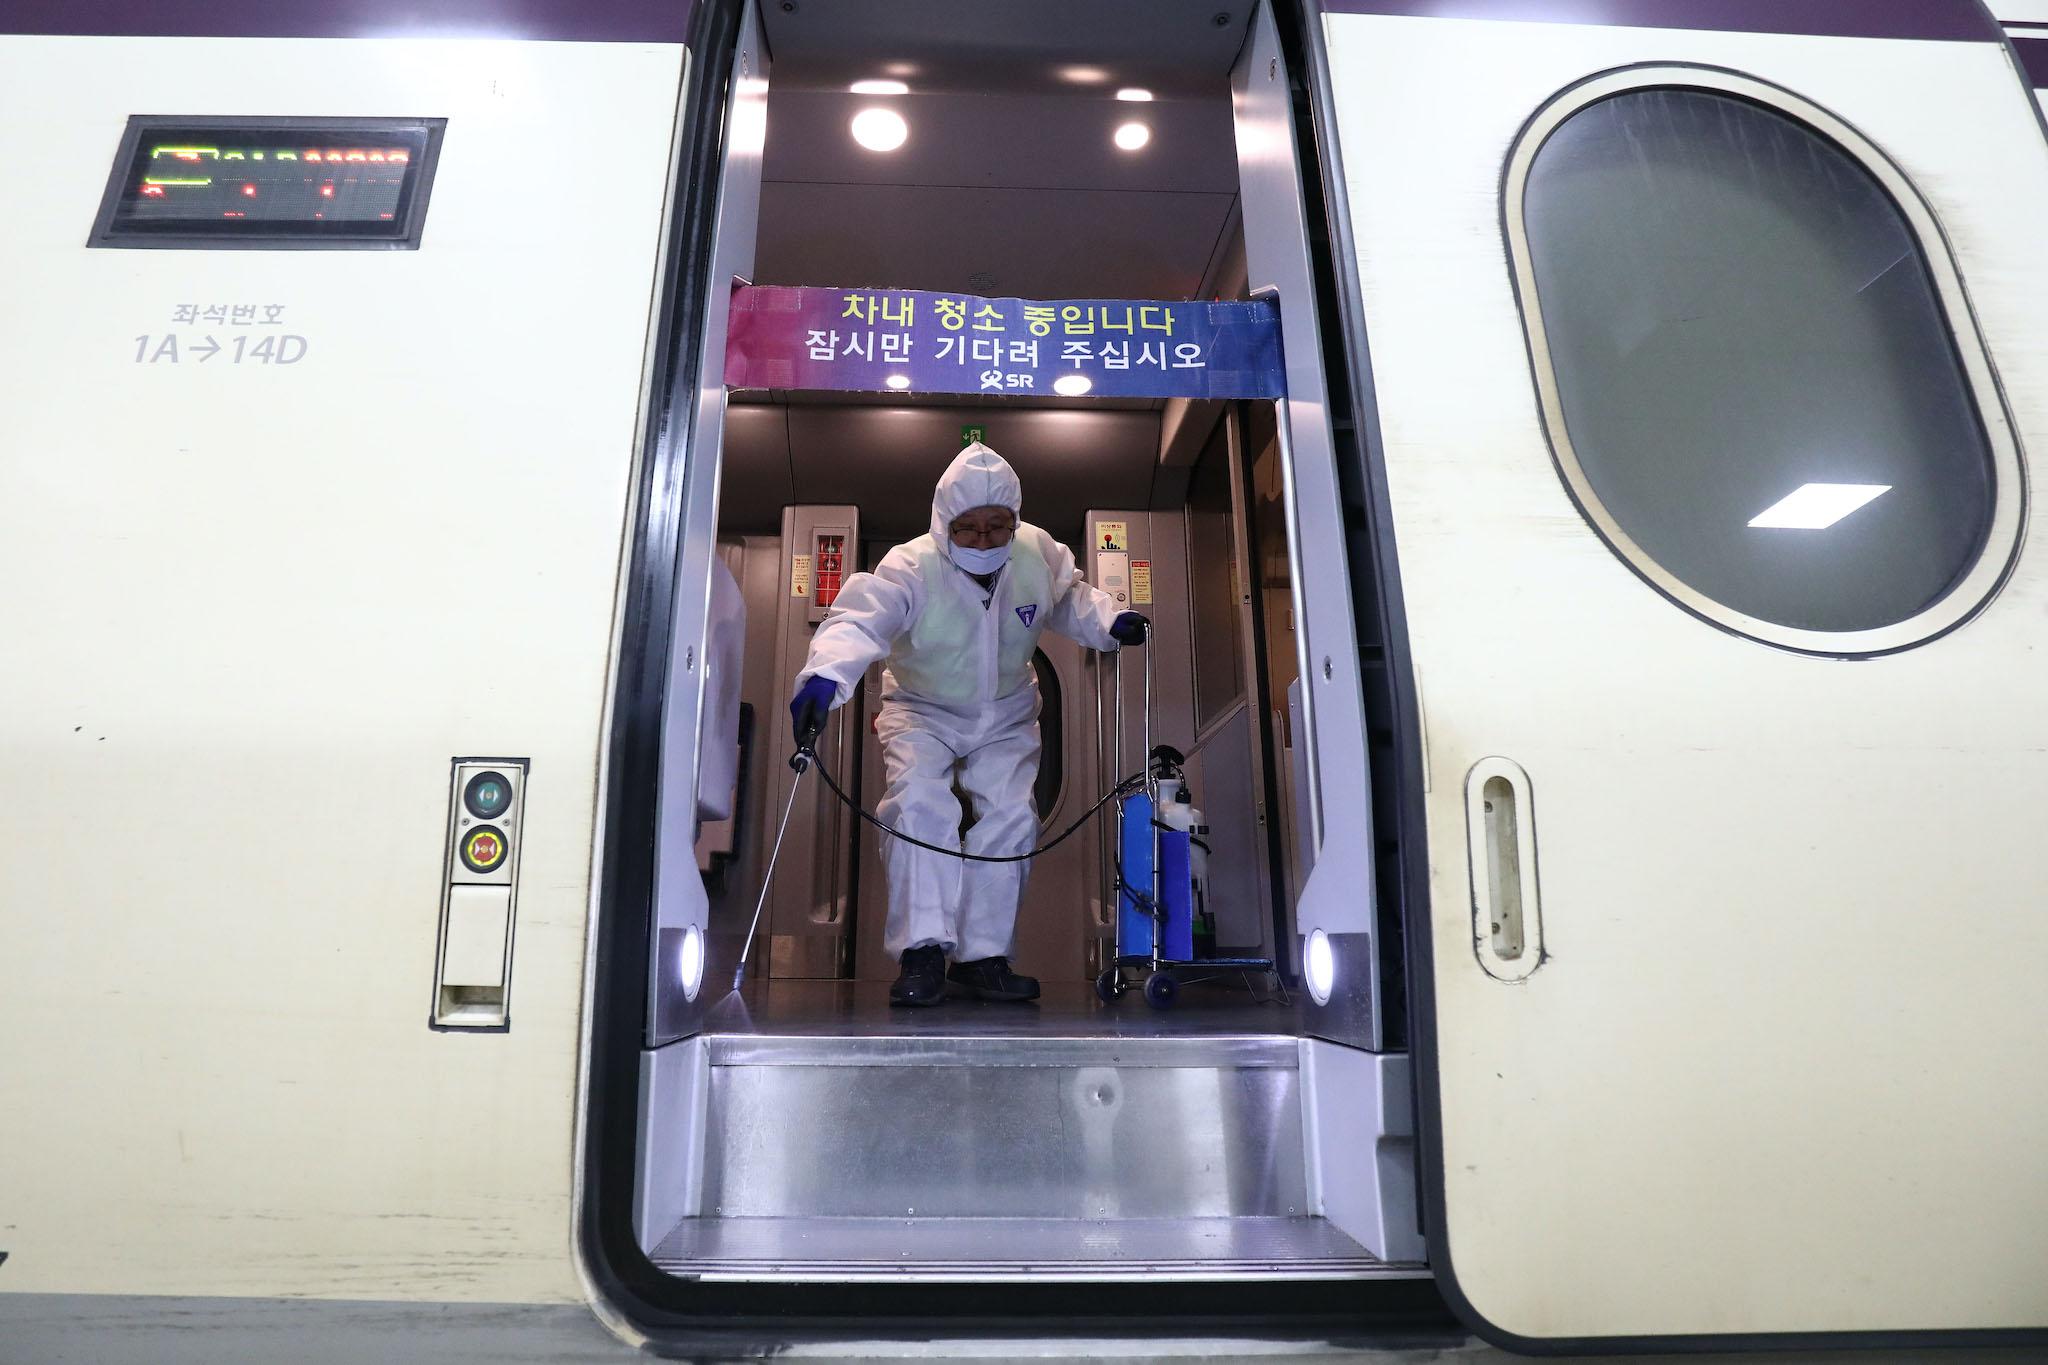 A disinfection worker wearing protective gears spray anti-septic solution in an train amid rising public concerns over the spread of China's Wuhan Coronavirus at SRT train station on January 24, 2020 in Seoul, South Korea